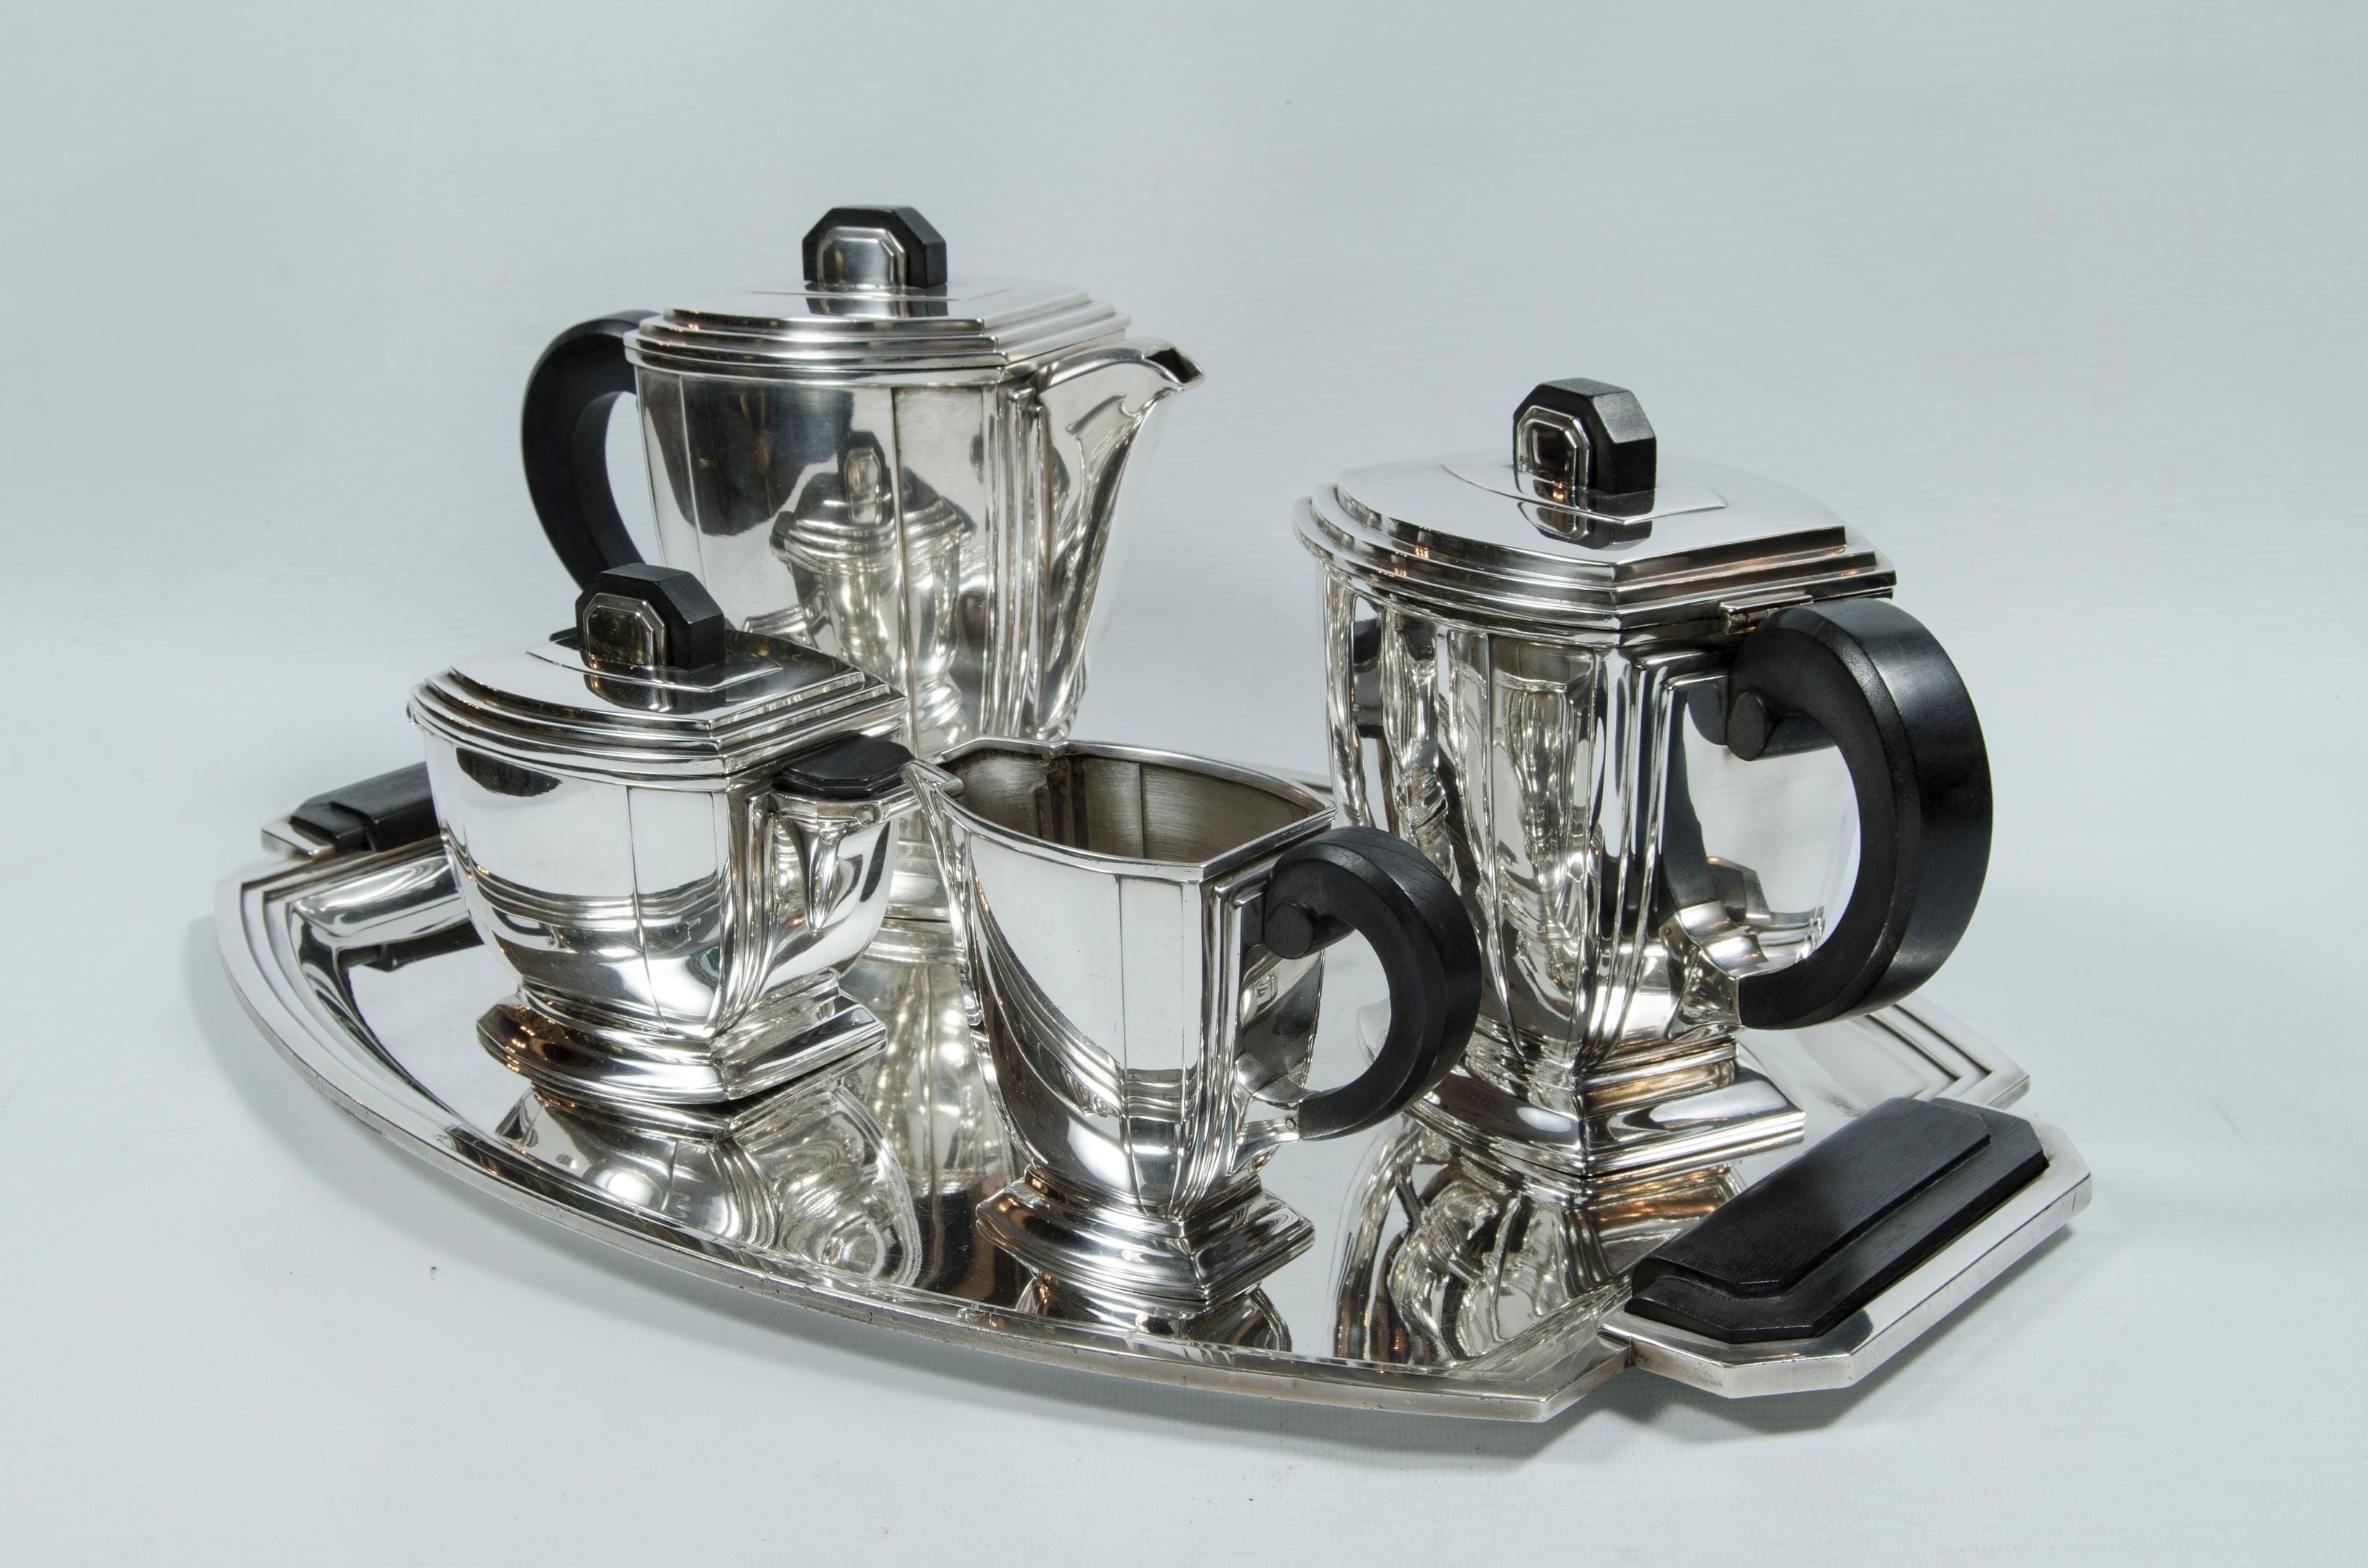 Art Deco coffee and tea set
Ravinet Denfert (goldsmith D, Hermes)
Circa 1925 Origin France
silver plated
perfect condition tray with ebony handles
the largest piece is 21 cm x 18 cm x 14 cm
tray 55 cm x 36 cm
gross weight 3136 kg.